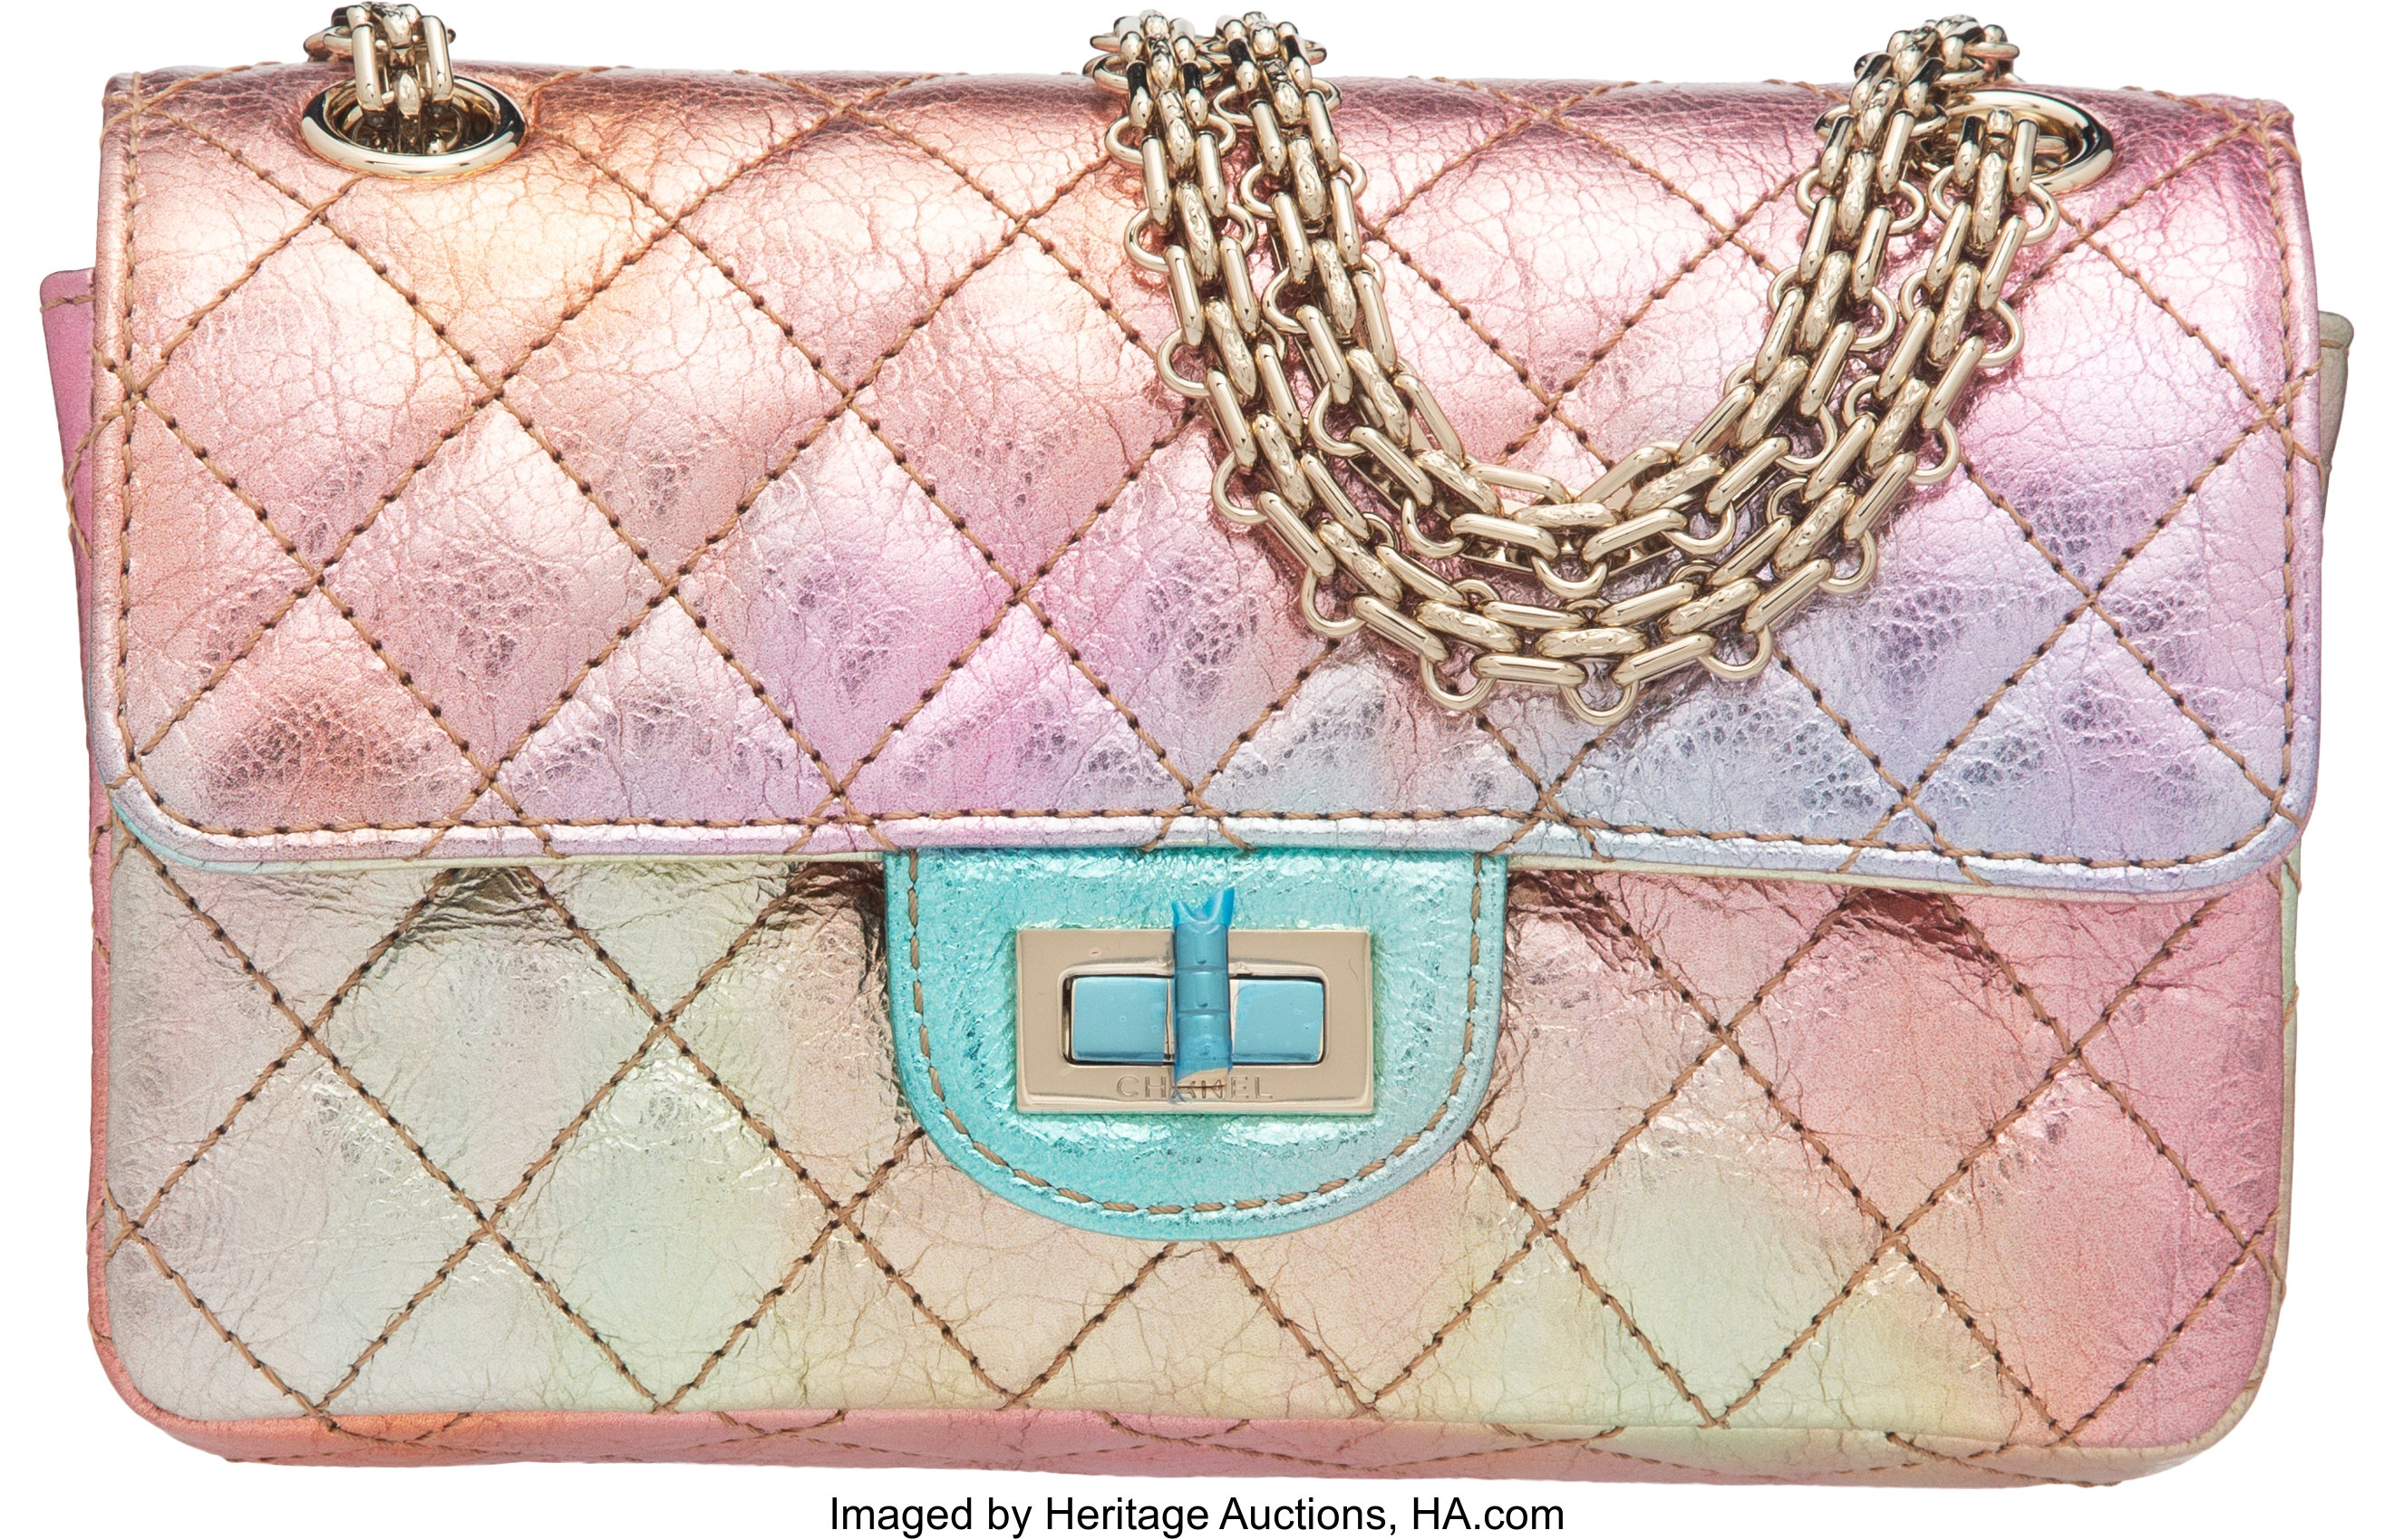 Sold at Auction: Chanel Coco chanel egg bag (limited edition)